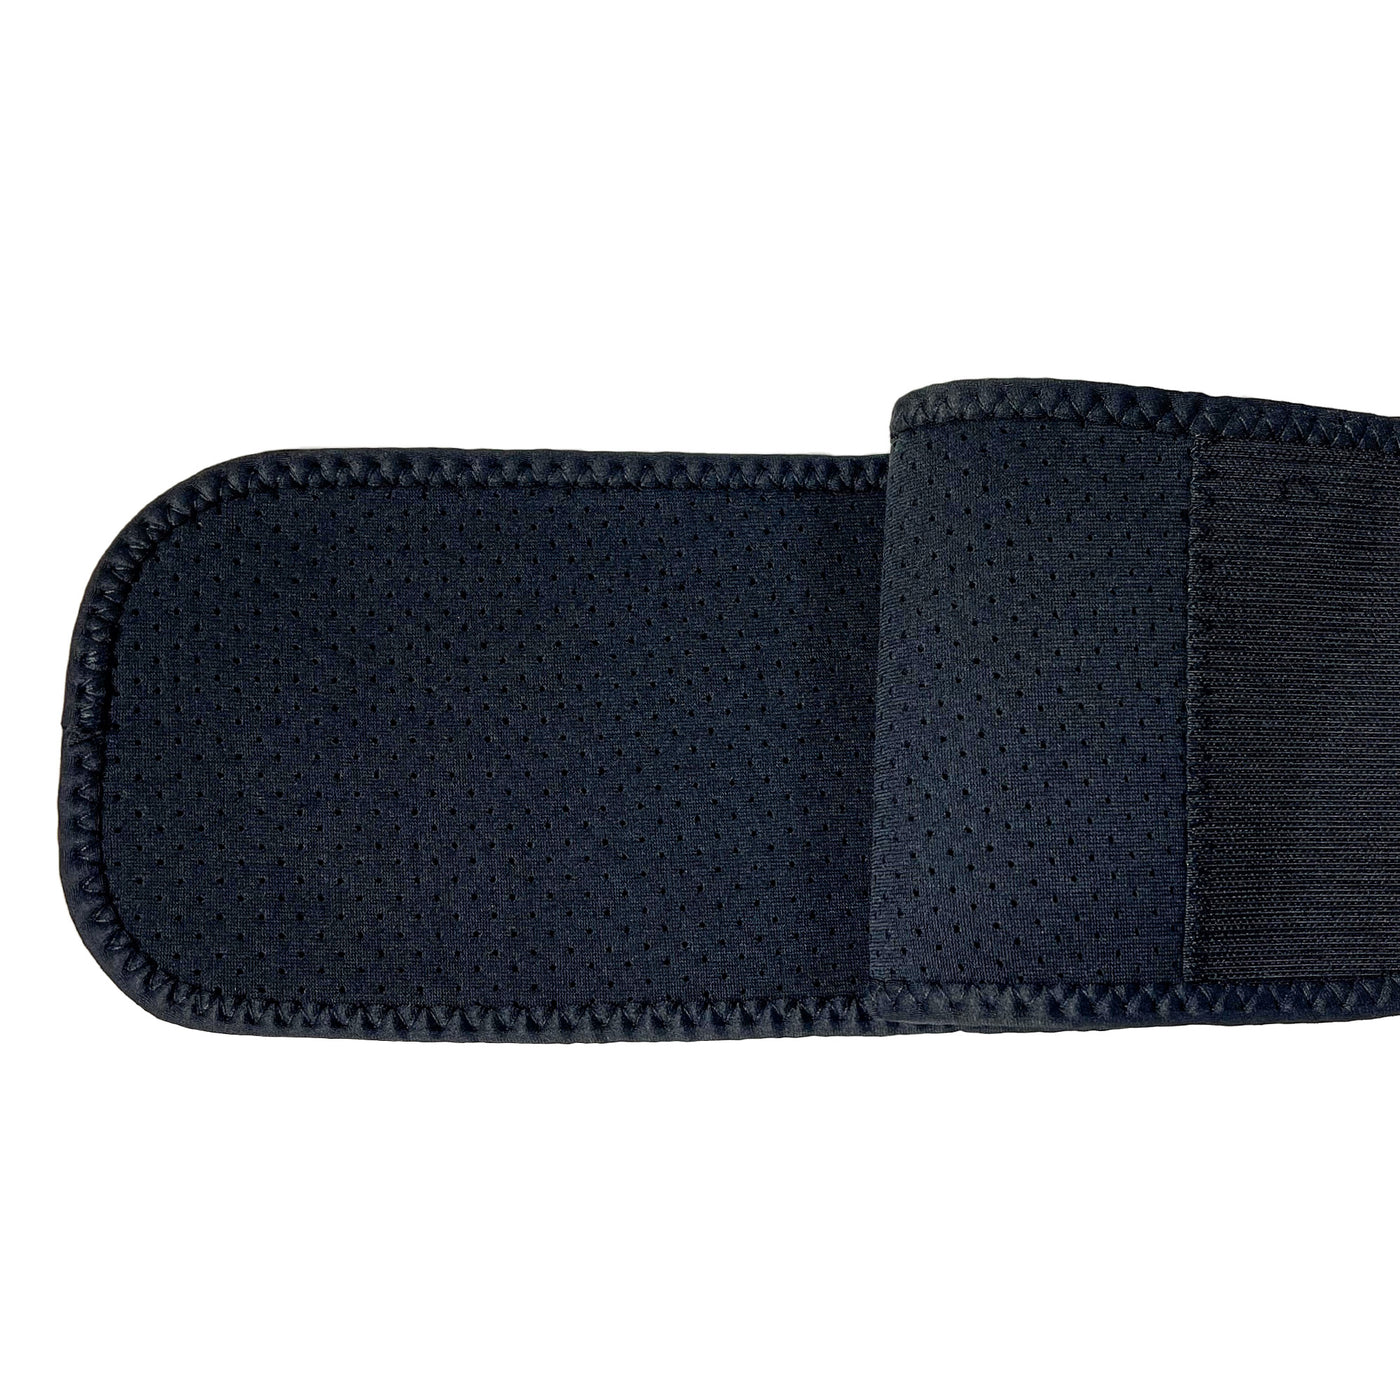 Unisex Belly Band Gun Holster for Concealed Carry